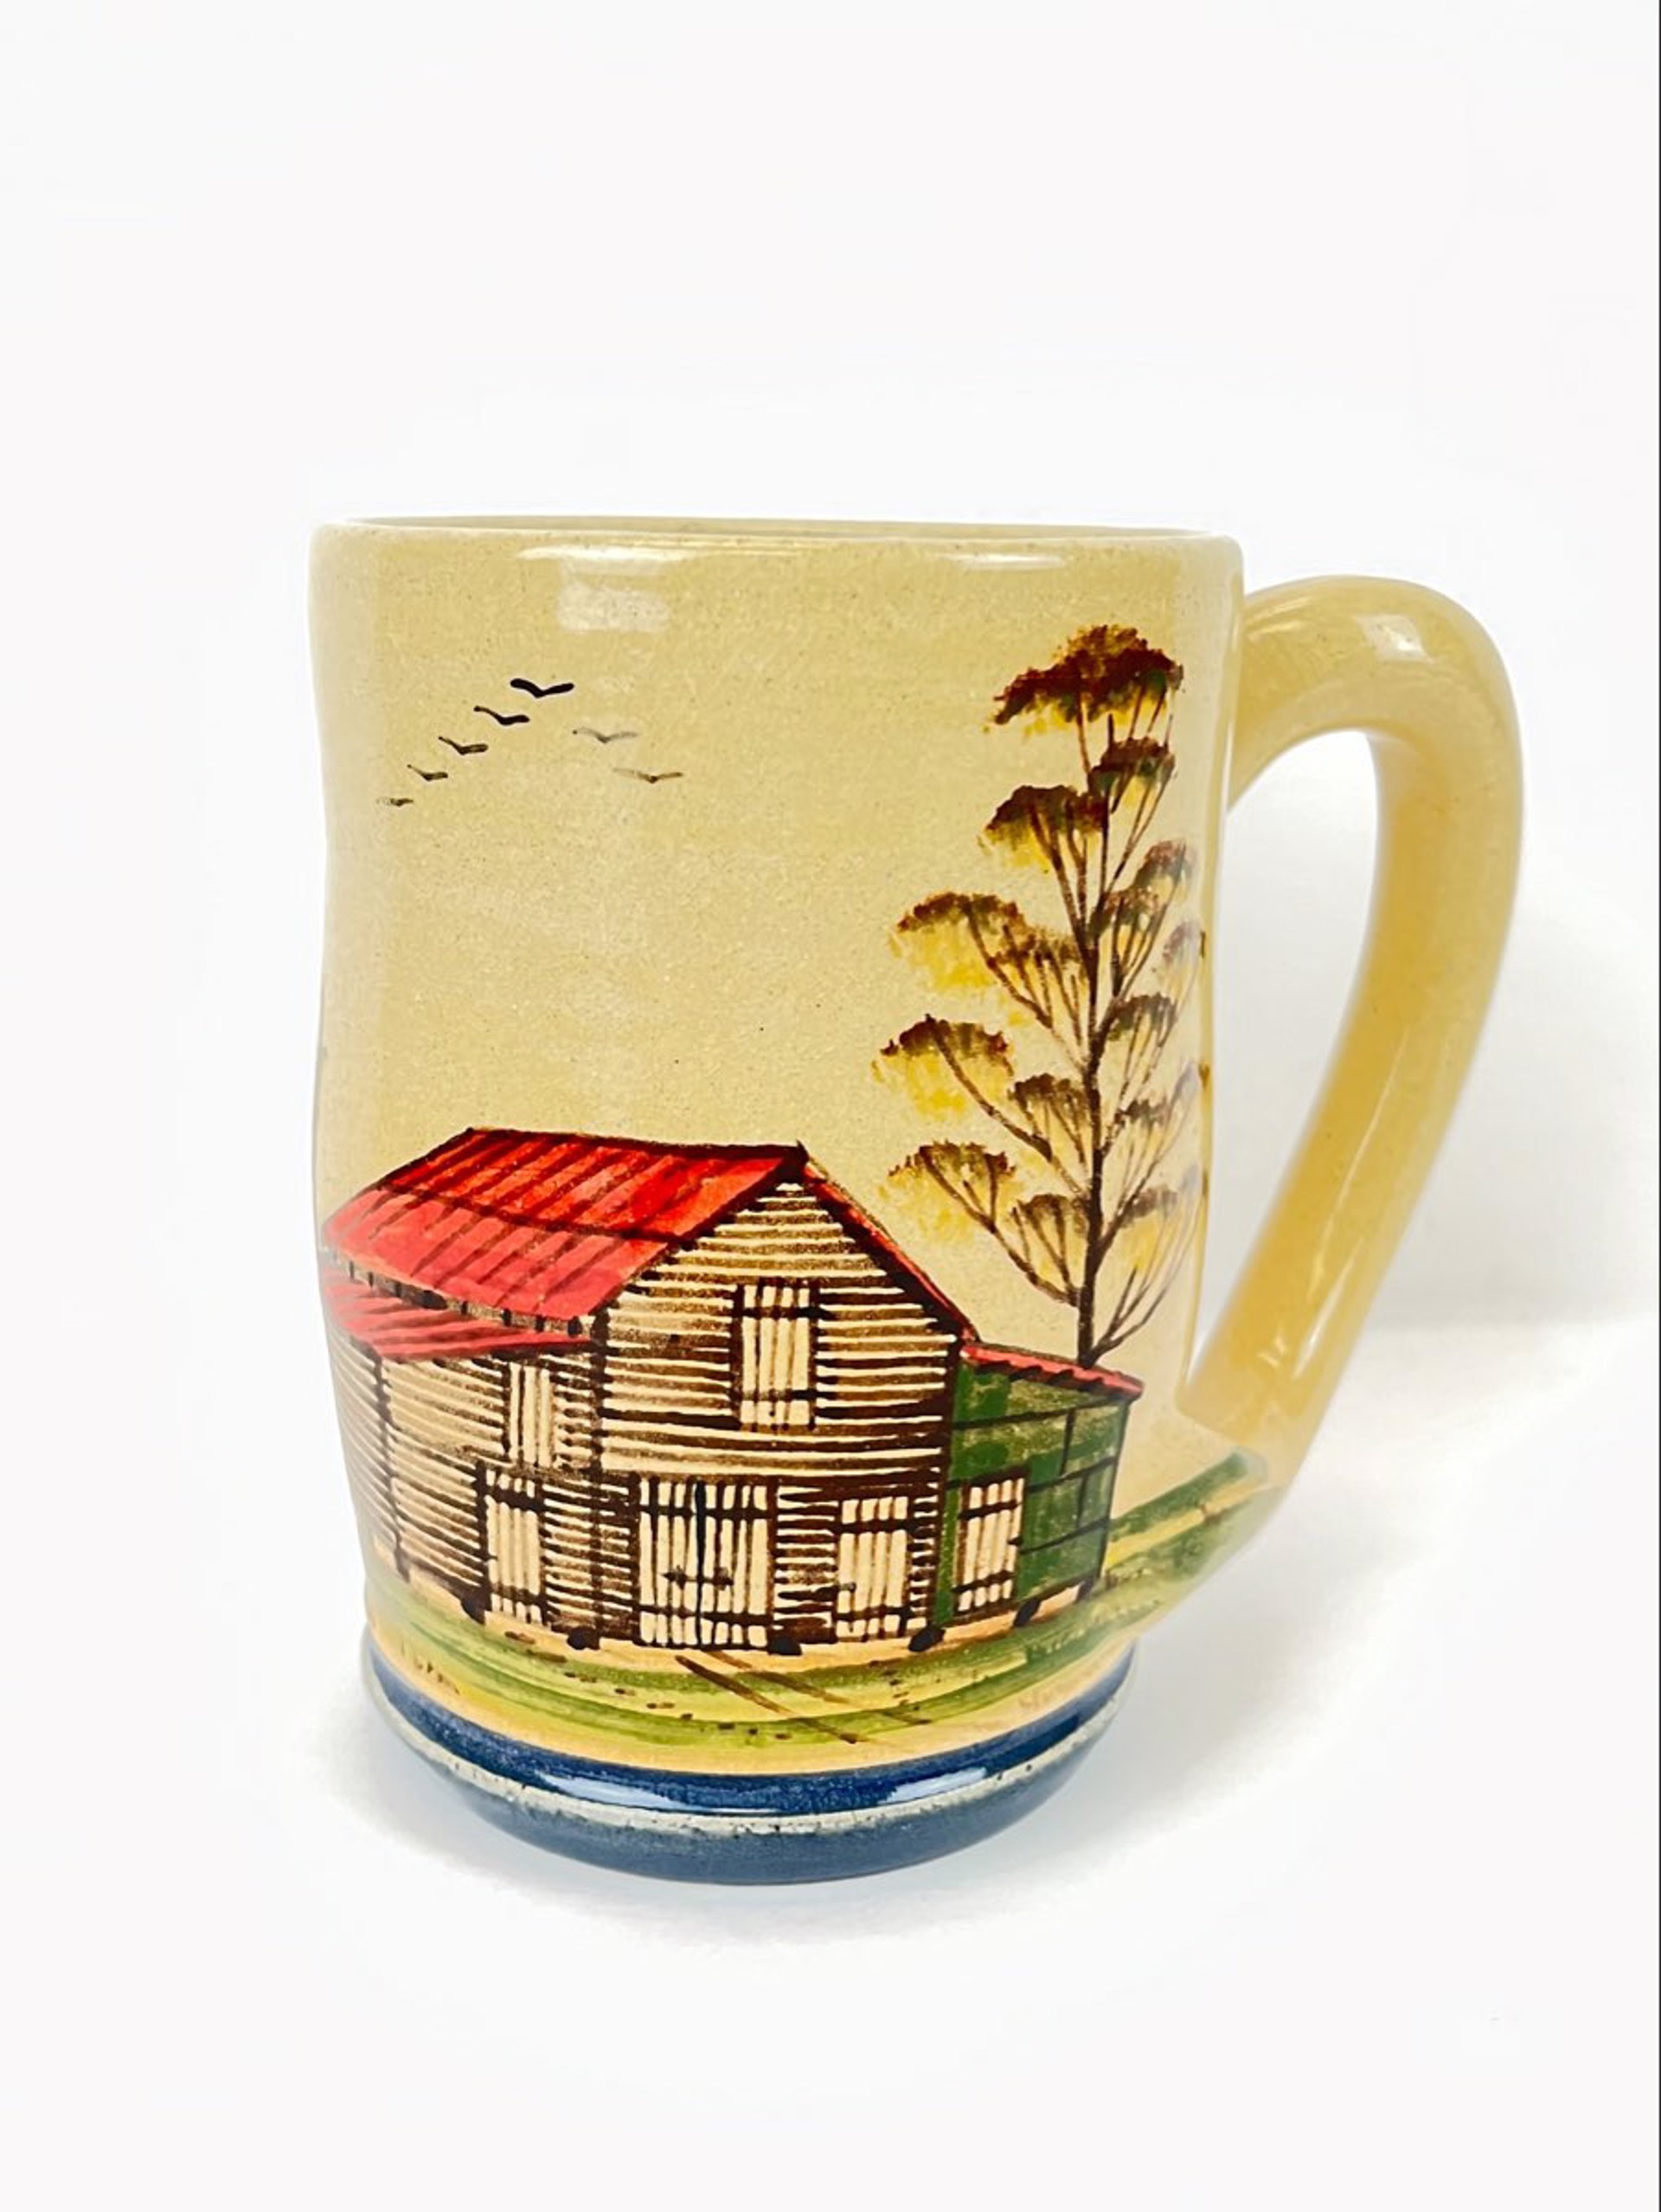 Painted Green/Brown Mug by Winton & Rosa Eugene